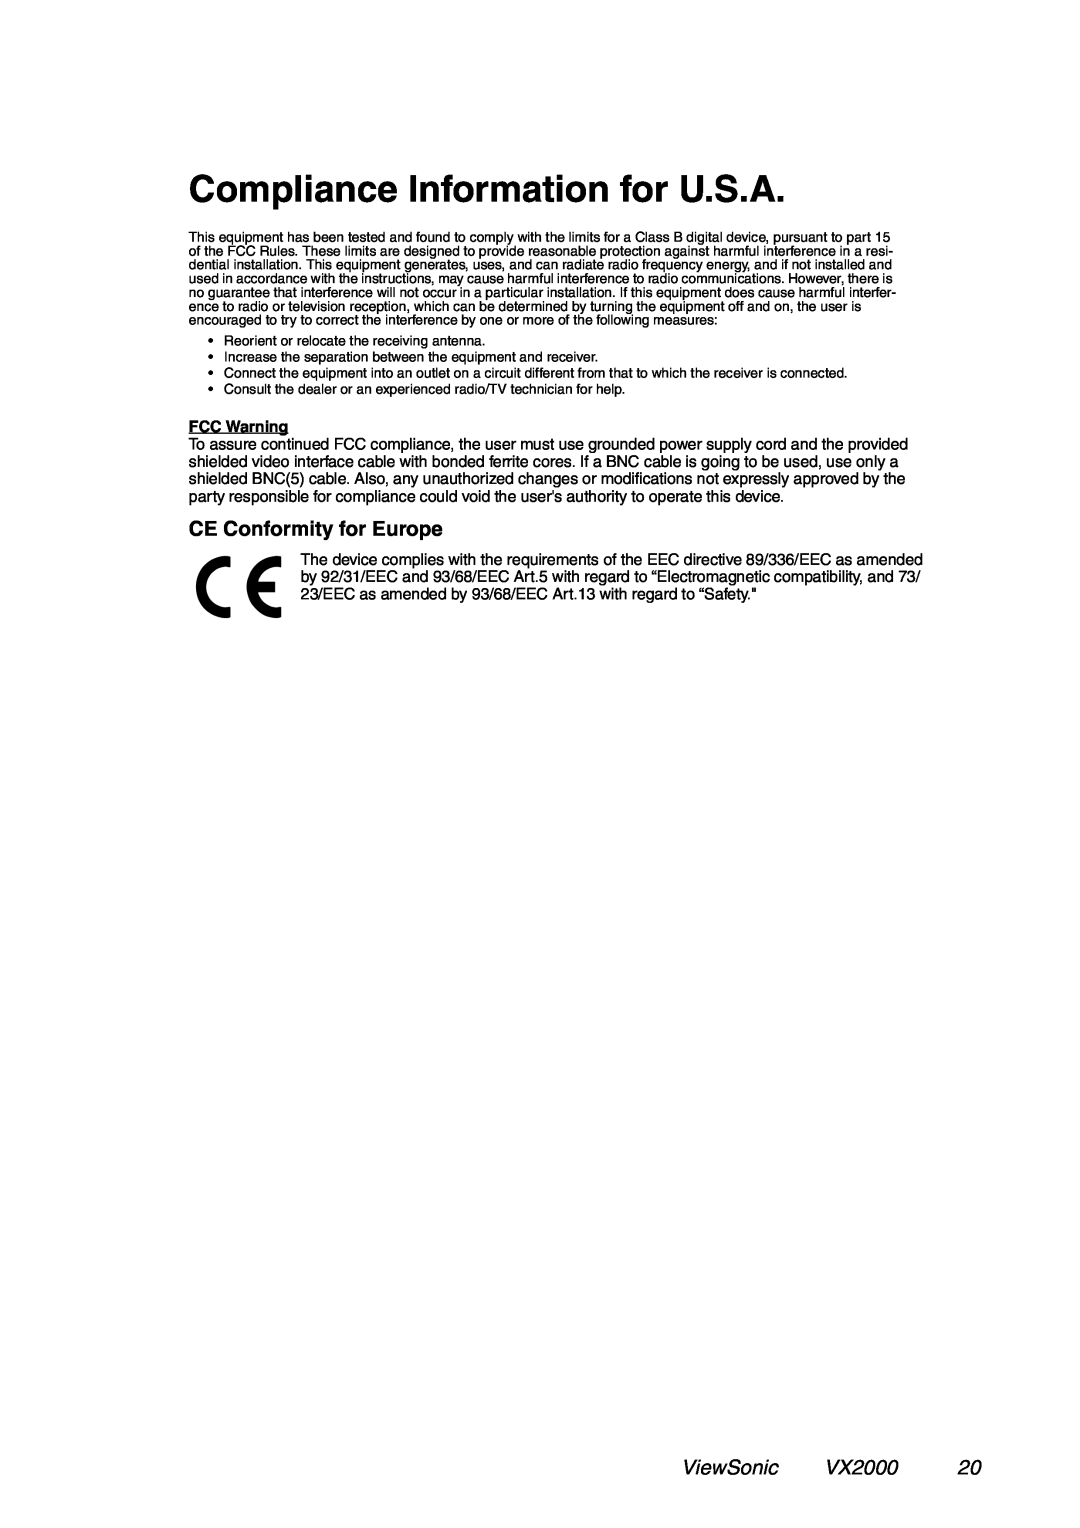 ViewSonic manual Compliance Information for U.S.A, CE Conformity for Europe, ViewSonic VX2000, FCC Warning 